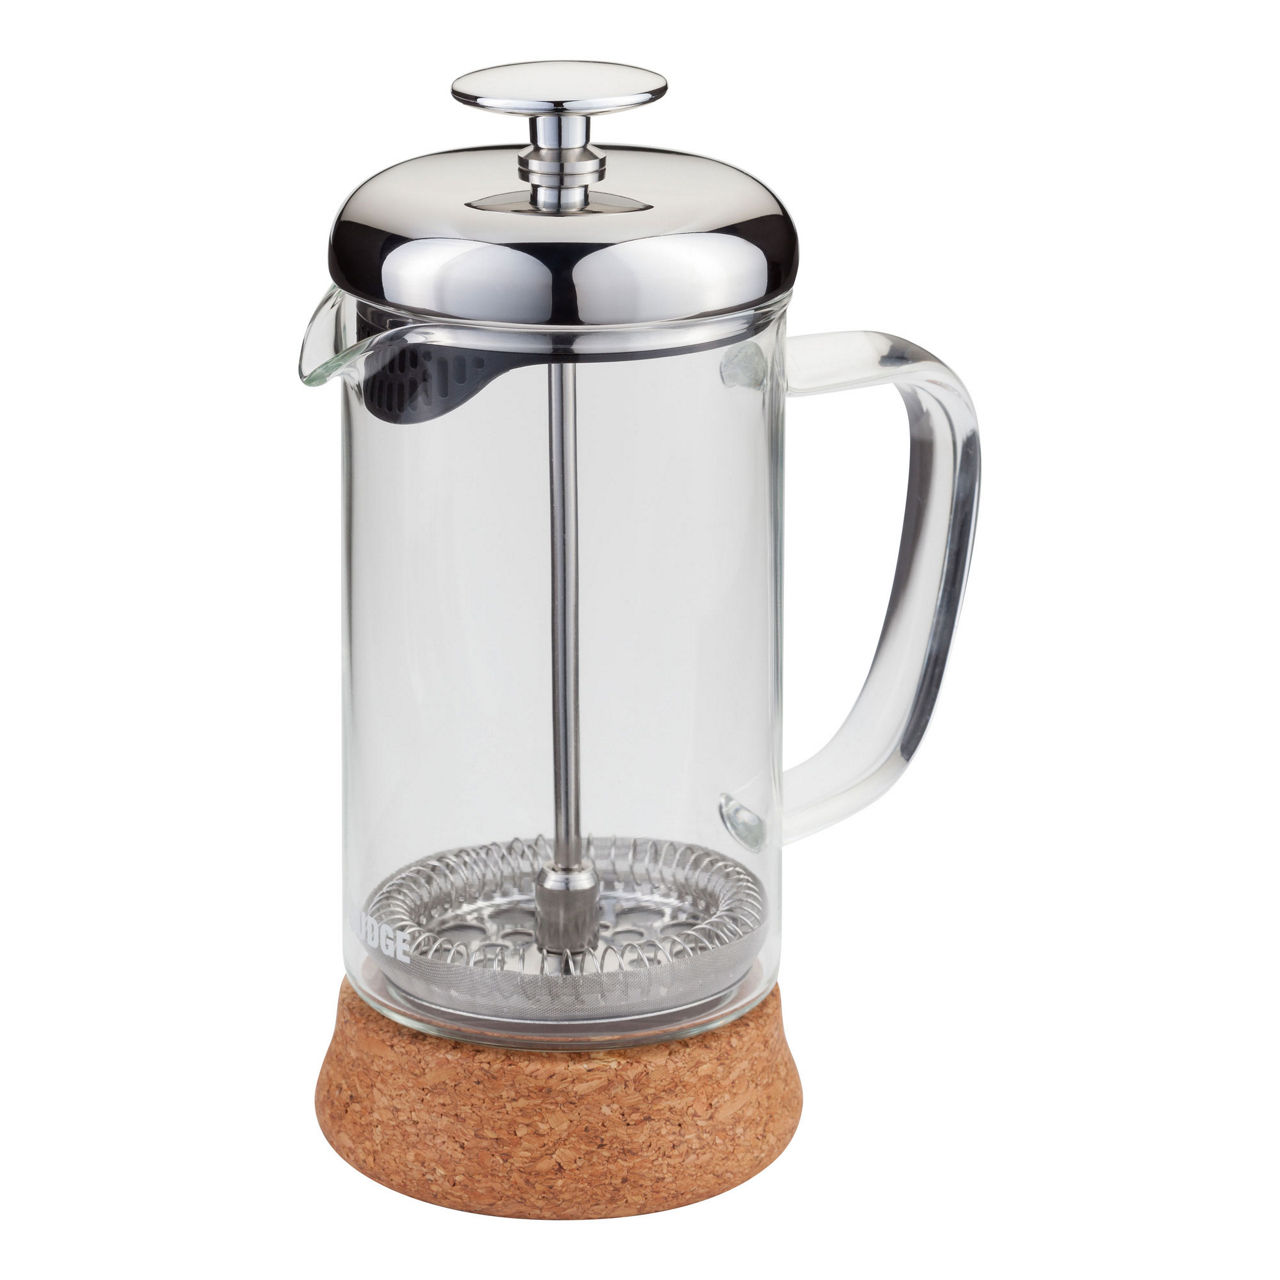 350ml / 3-cup Stainless Steel Glass Cafetiere French Filter Coffee